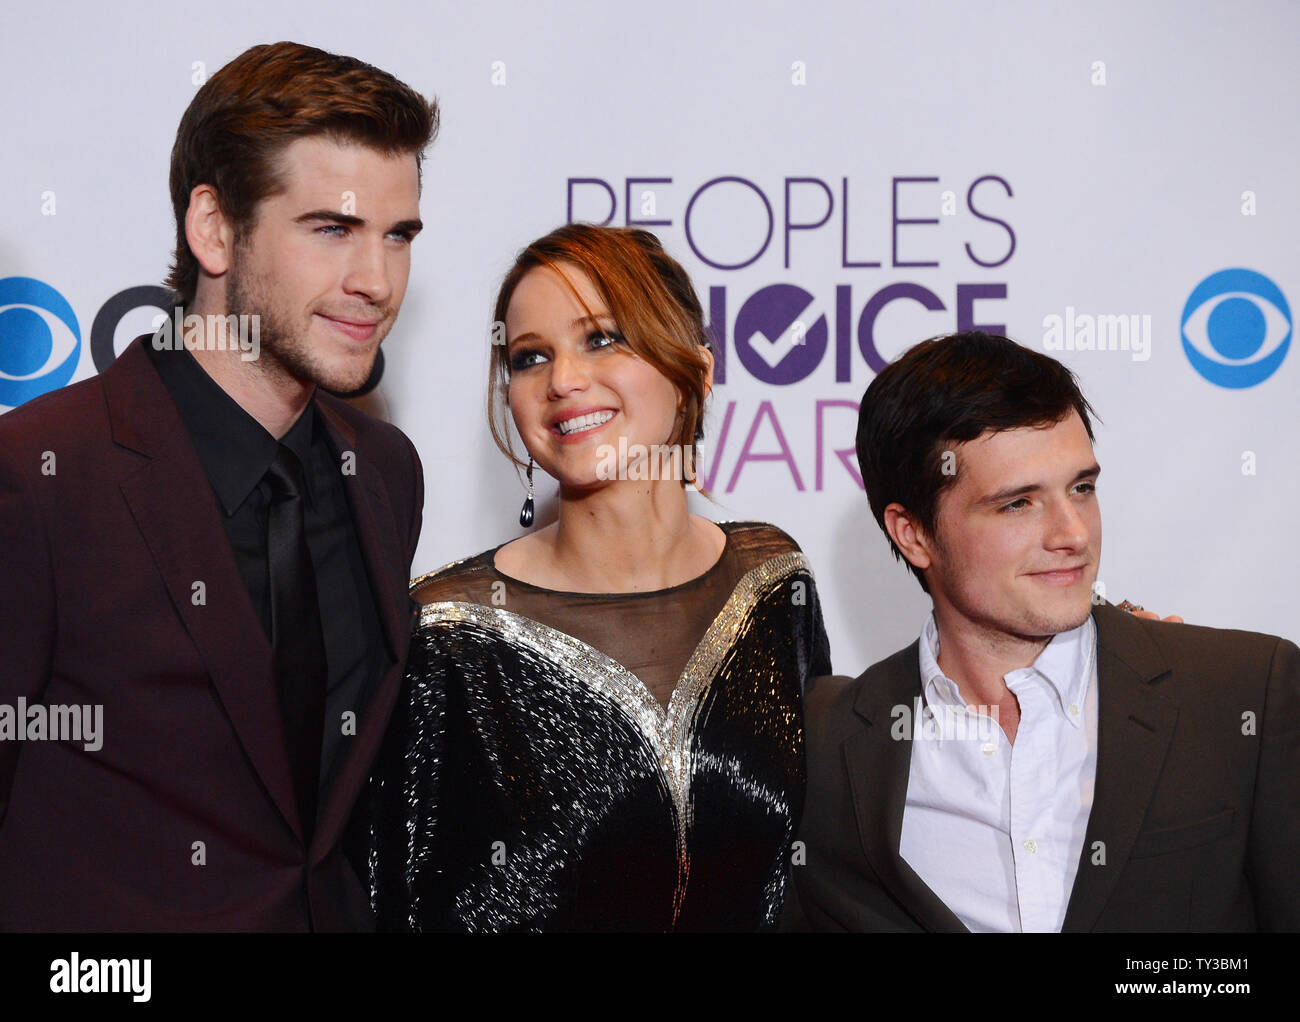 People's Choice Awards 2013: 'The Hunger Games' Takes Home 5